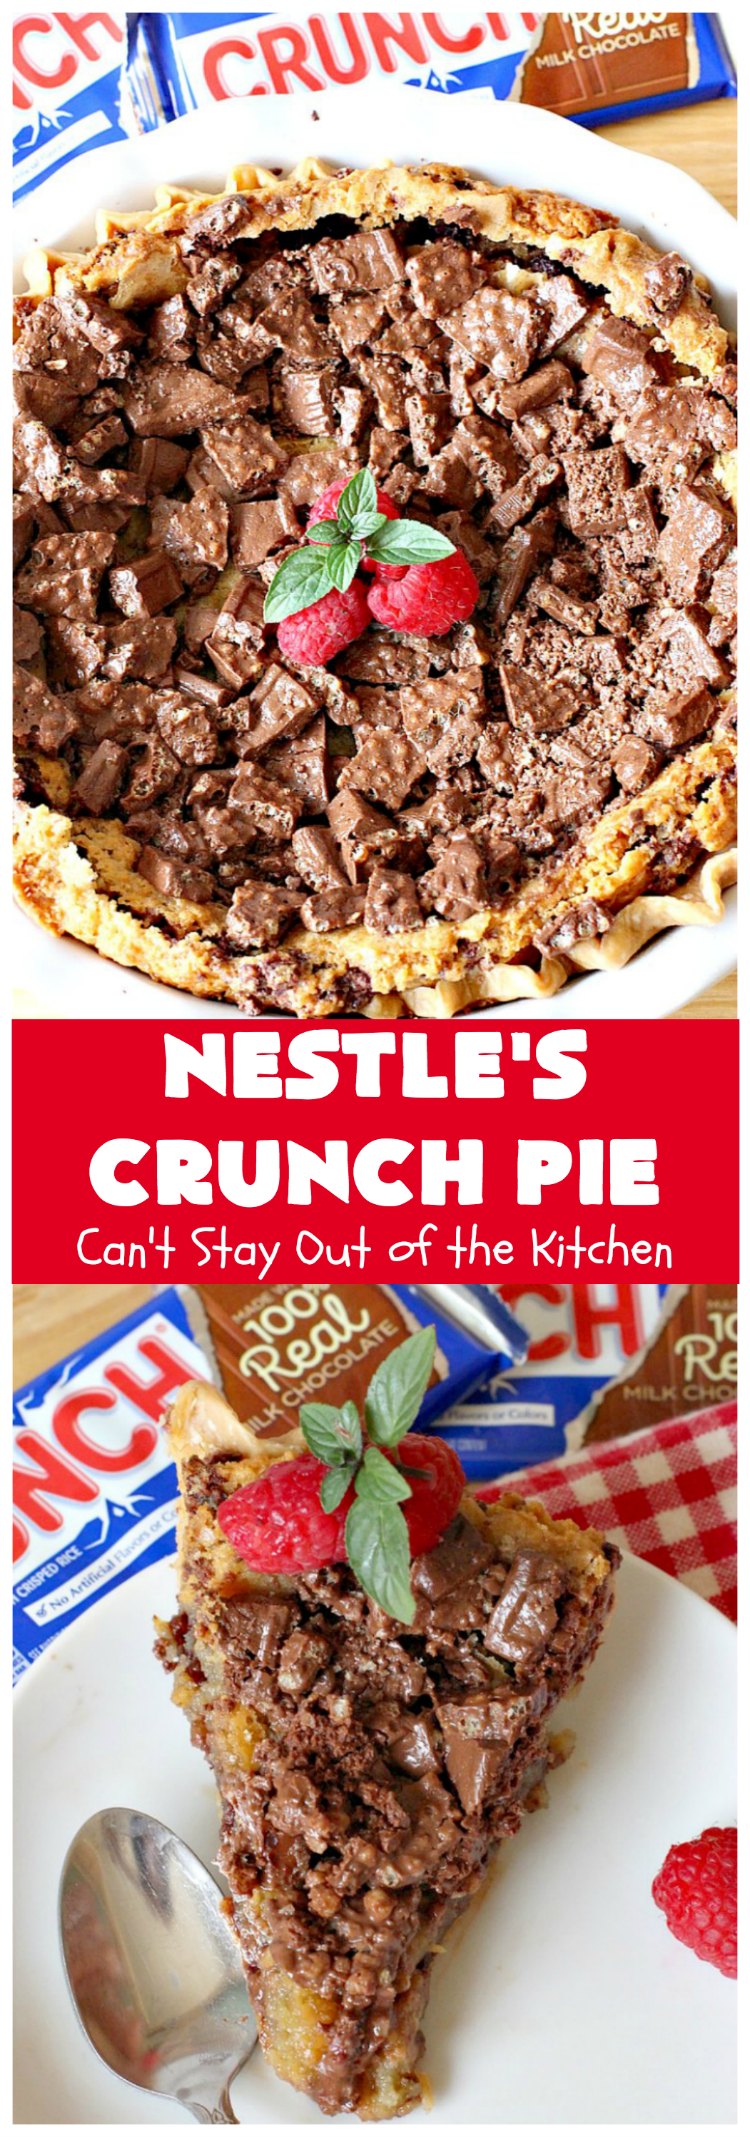 Nestle's Crunch Pie | Can't Stay Out of the Kitchen | this spectacular #pie is filled with #NestlesCrunchBars! It has that smooth milk #chocolate taste with a little crunch added to make it special. Every bite is a chocolaty delight. Terrific for company, #holidays like #ValentinesDay or special occasions. #Nestles #dessert #HolidayDessert #ChocolateDessert #NestlesCrunchPie